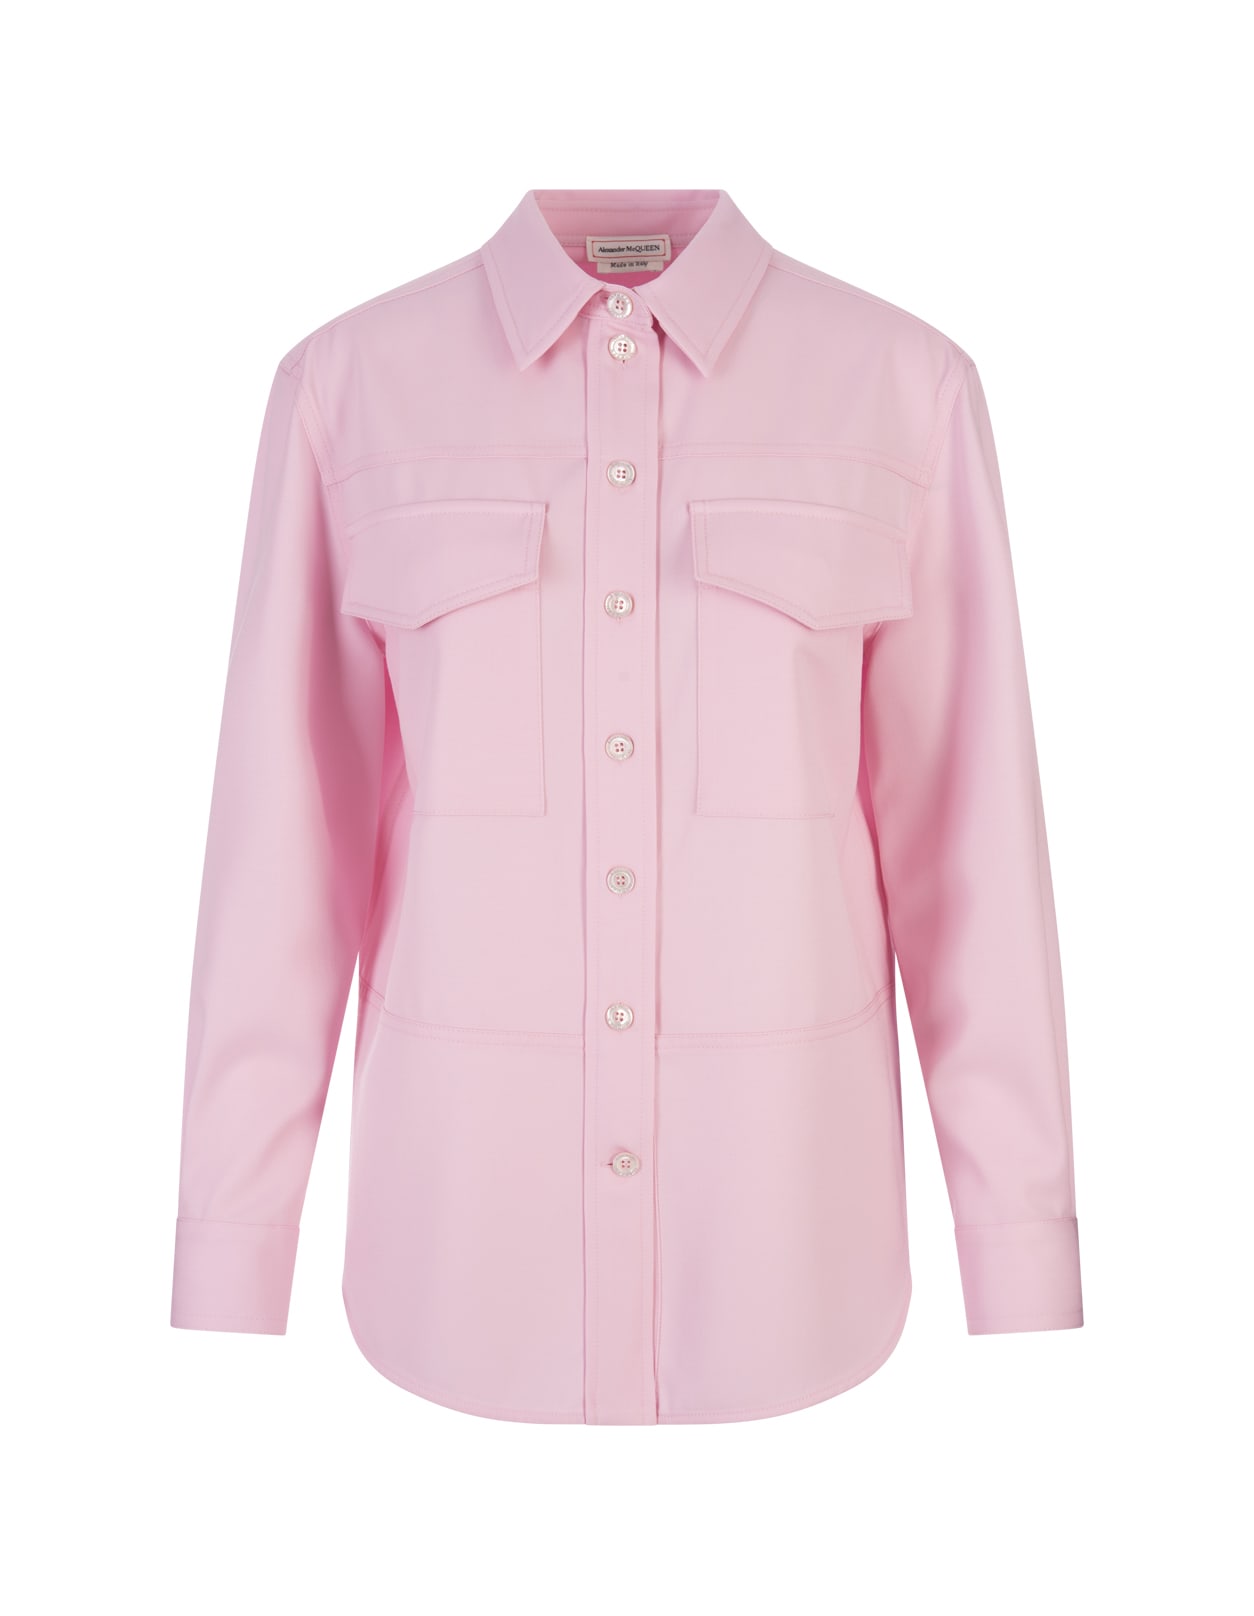 ALEXANDER MCQUEEN SHIRT WITH MILITARY POCKETS IN LIGHT PINK